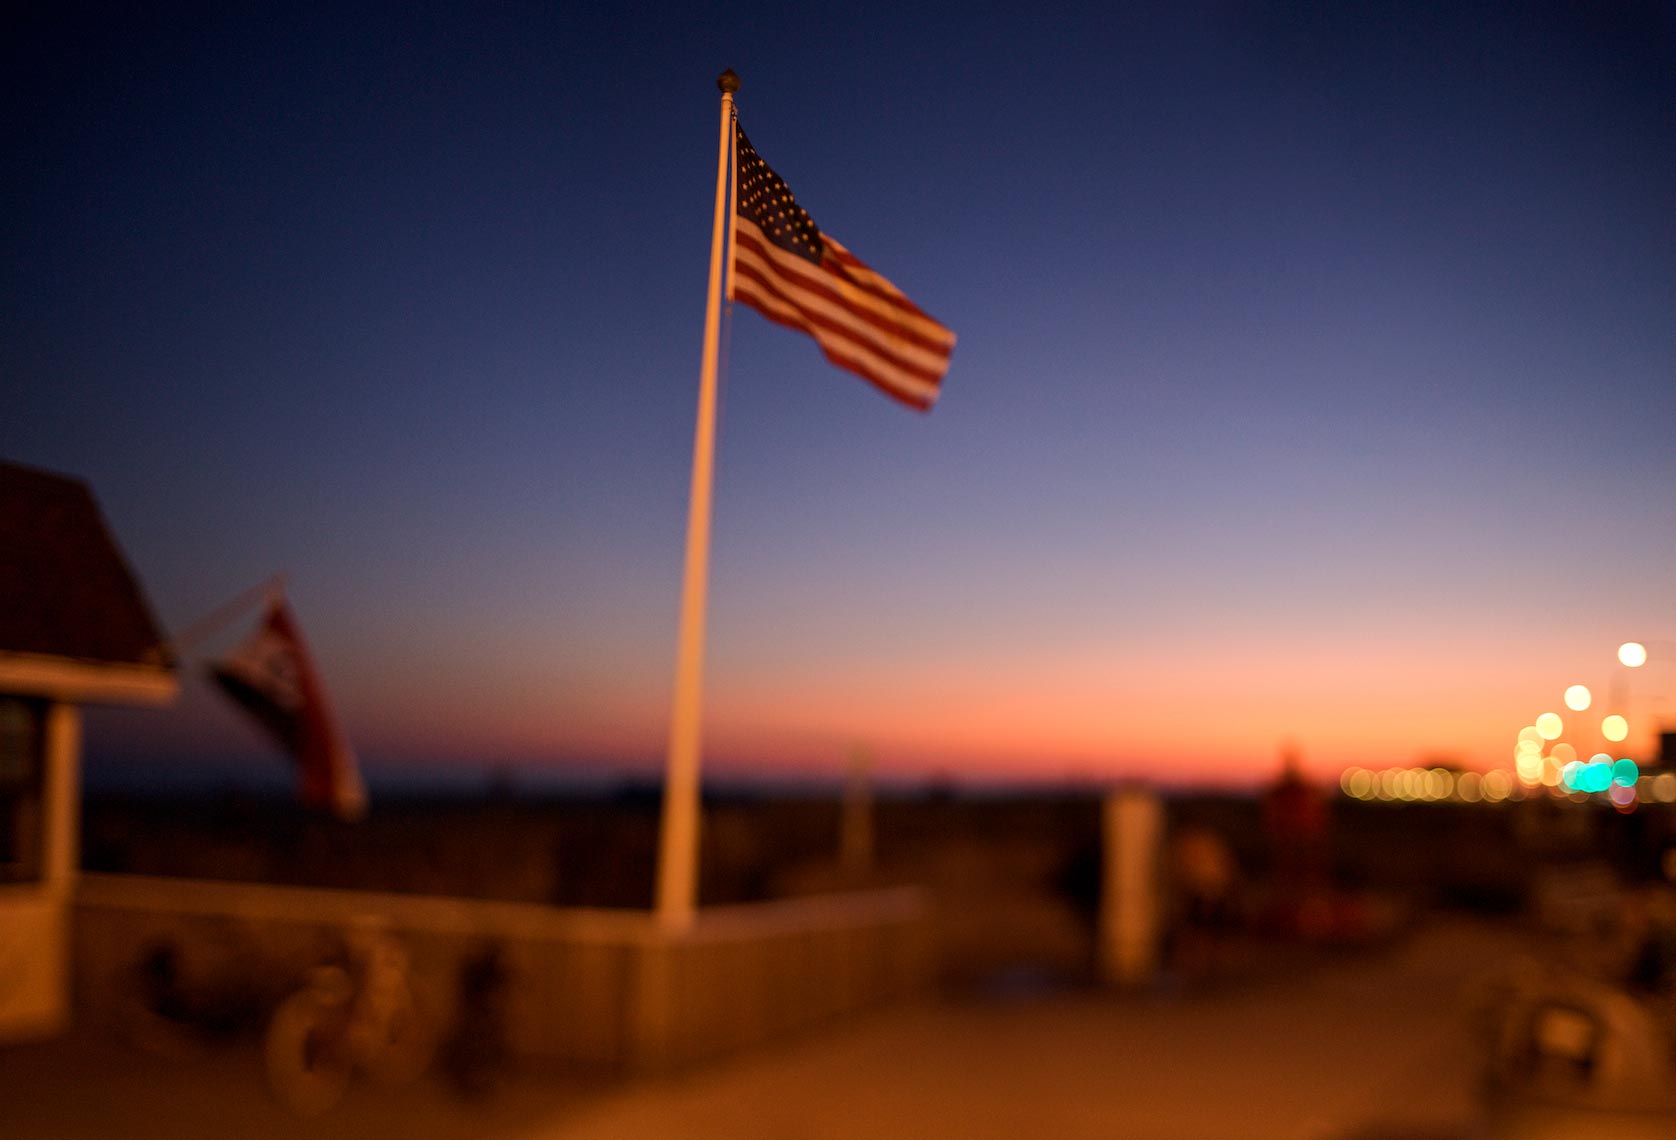 Cape May, New Jersey - Boardwalk Flag at Dusk